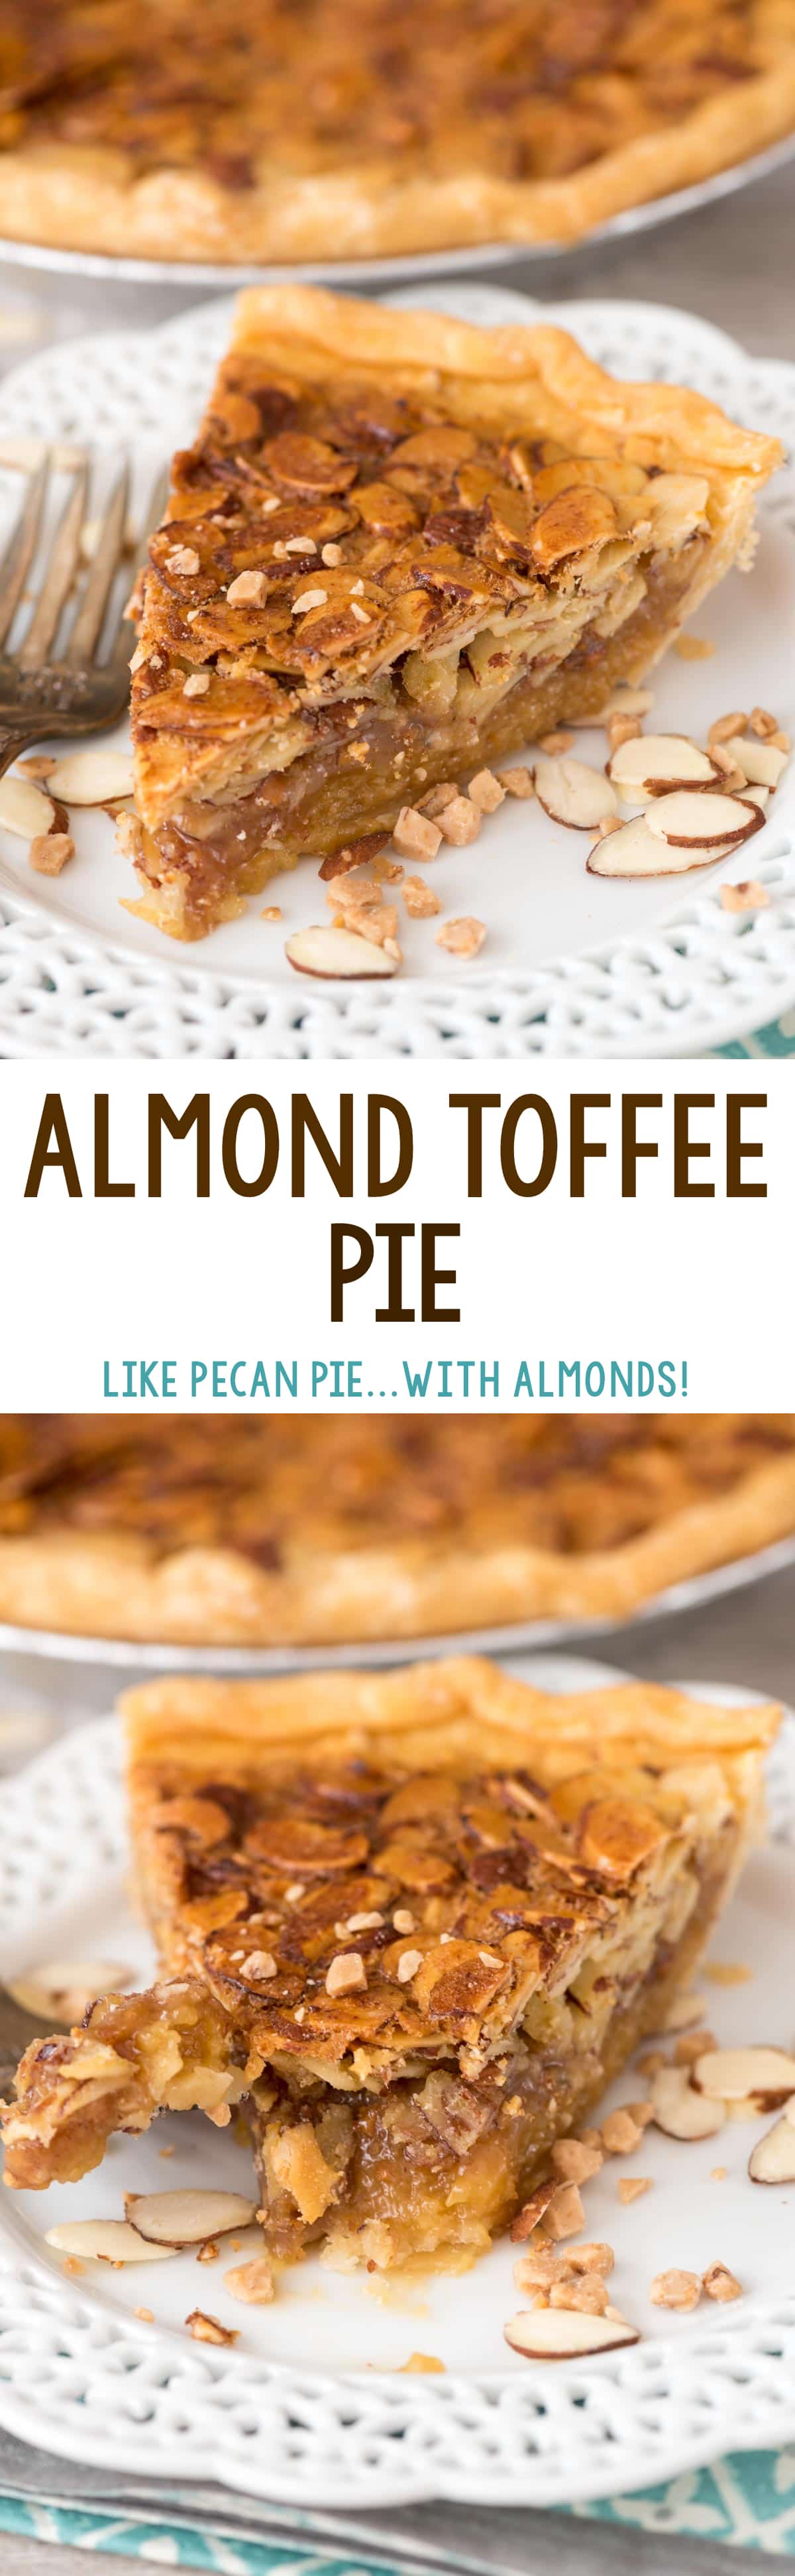 EASY Toffee Almond Pie - this pie recipe is like a pecan pie but with almonds and toffee instead! It tasted so good we couldn't stop eating it!